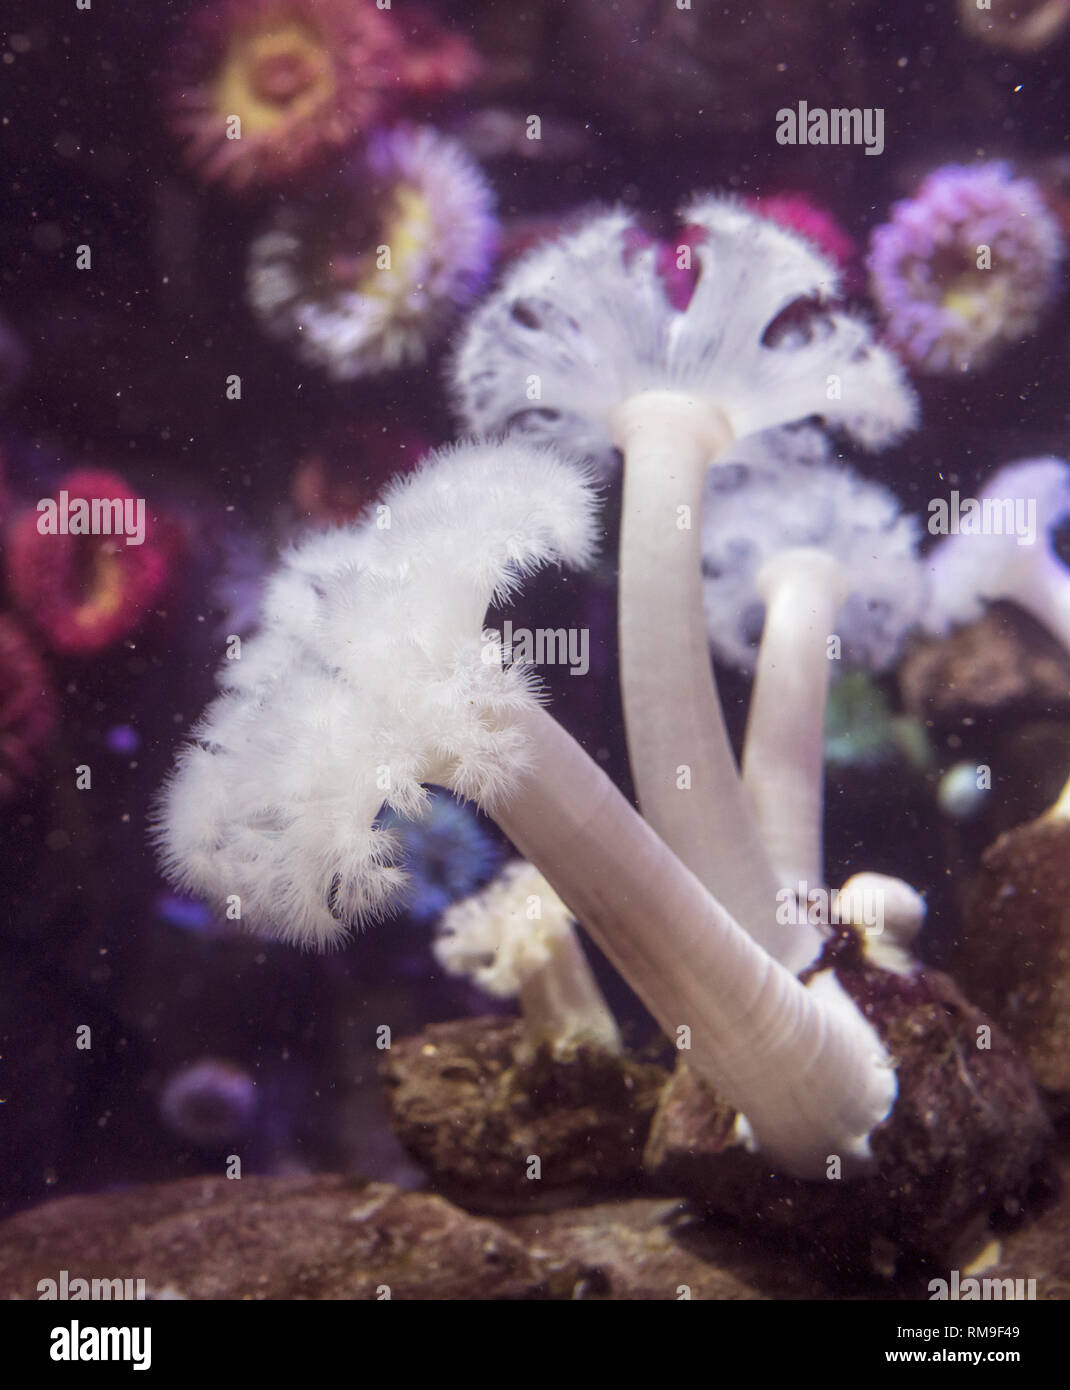 Giant Plumose Anemone or White-Plumed Anemone at Ripley's Aquarium, in Toronto, Canada. Metridium farcimen is found on the western seaboard of the Uni Stock Photo